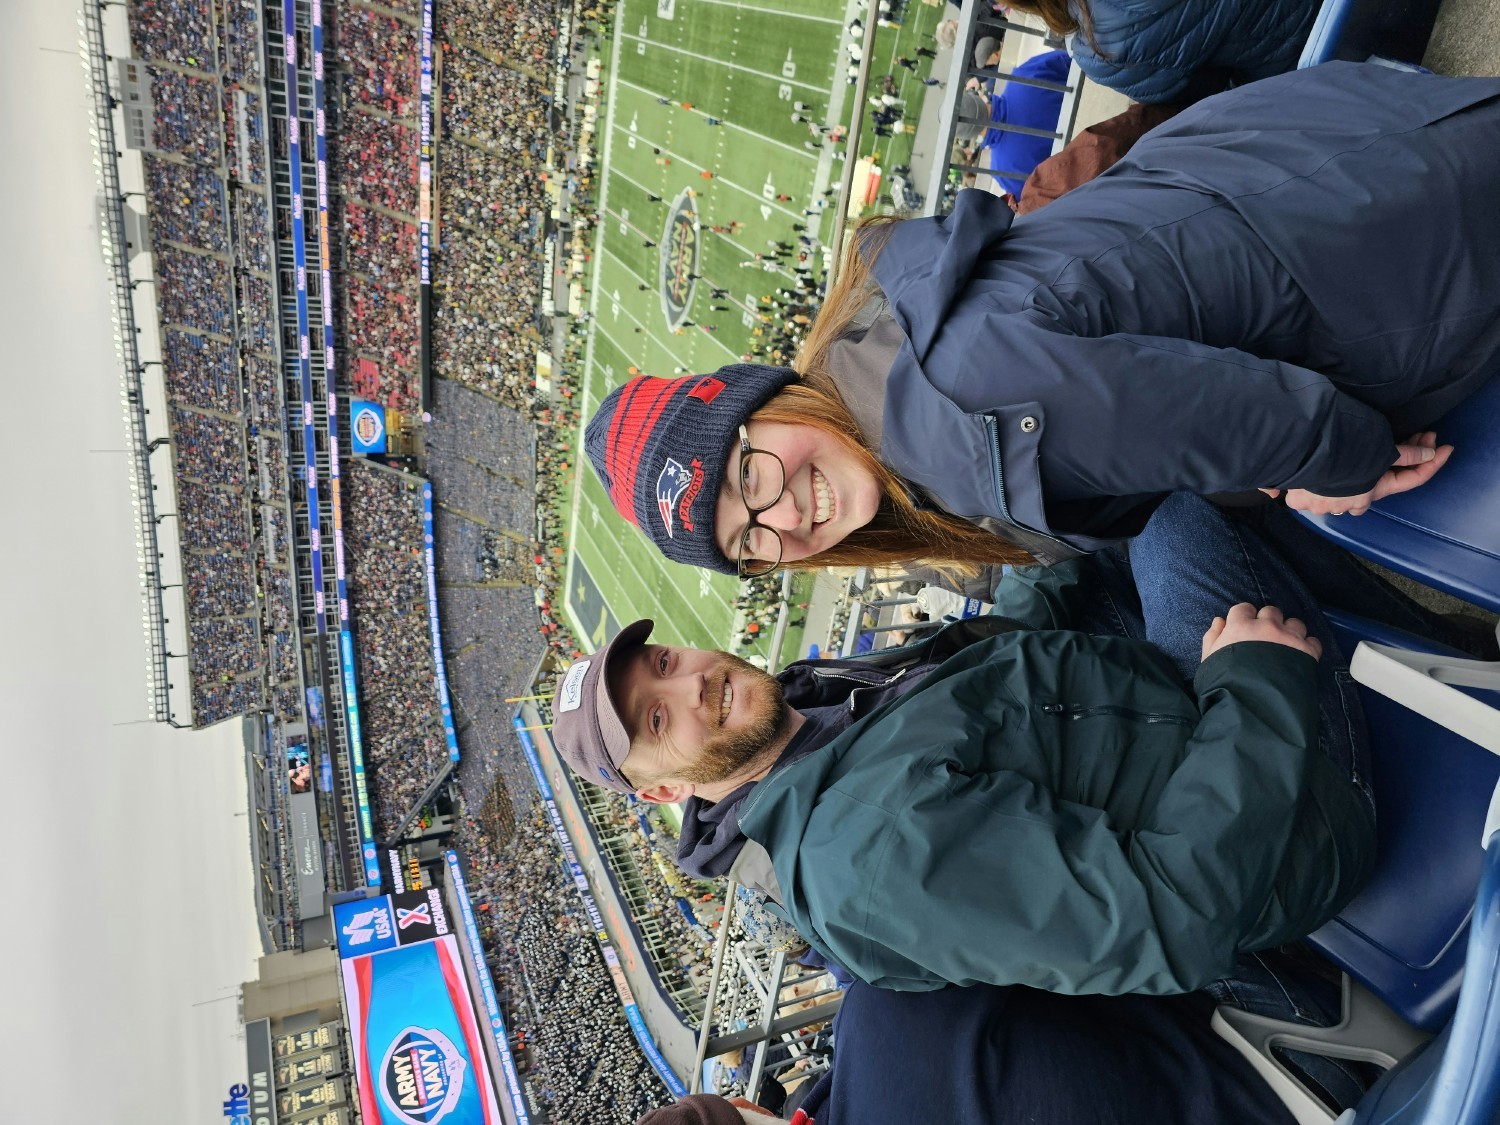 AMC's Operations Manager at the Army vs Navy football game in Foxborough, MA! 